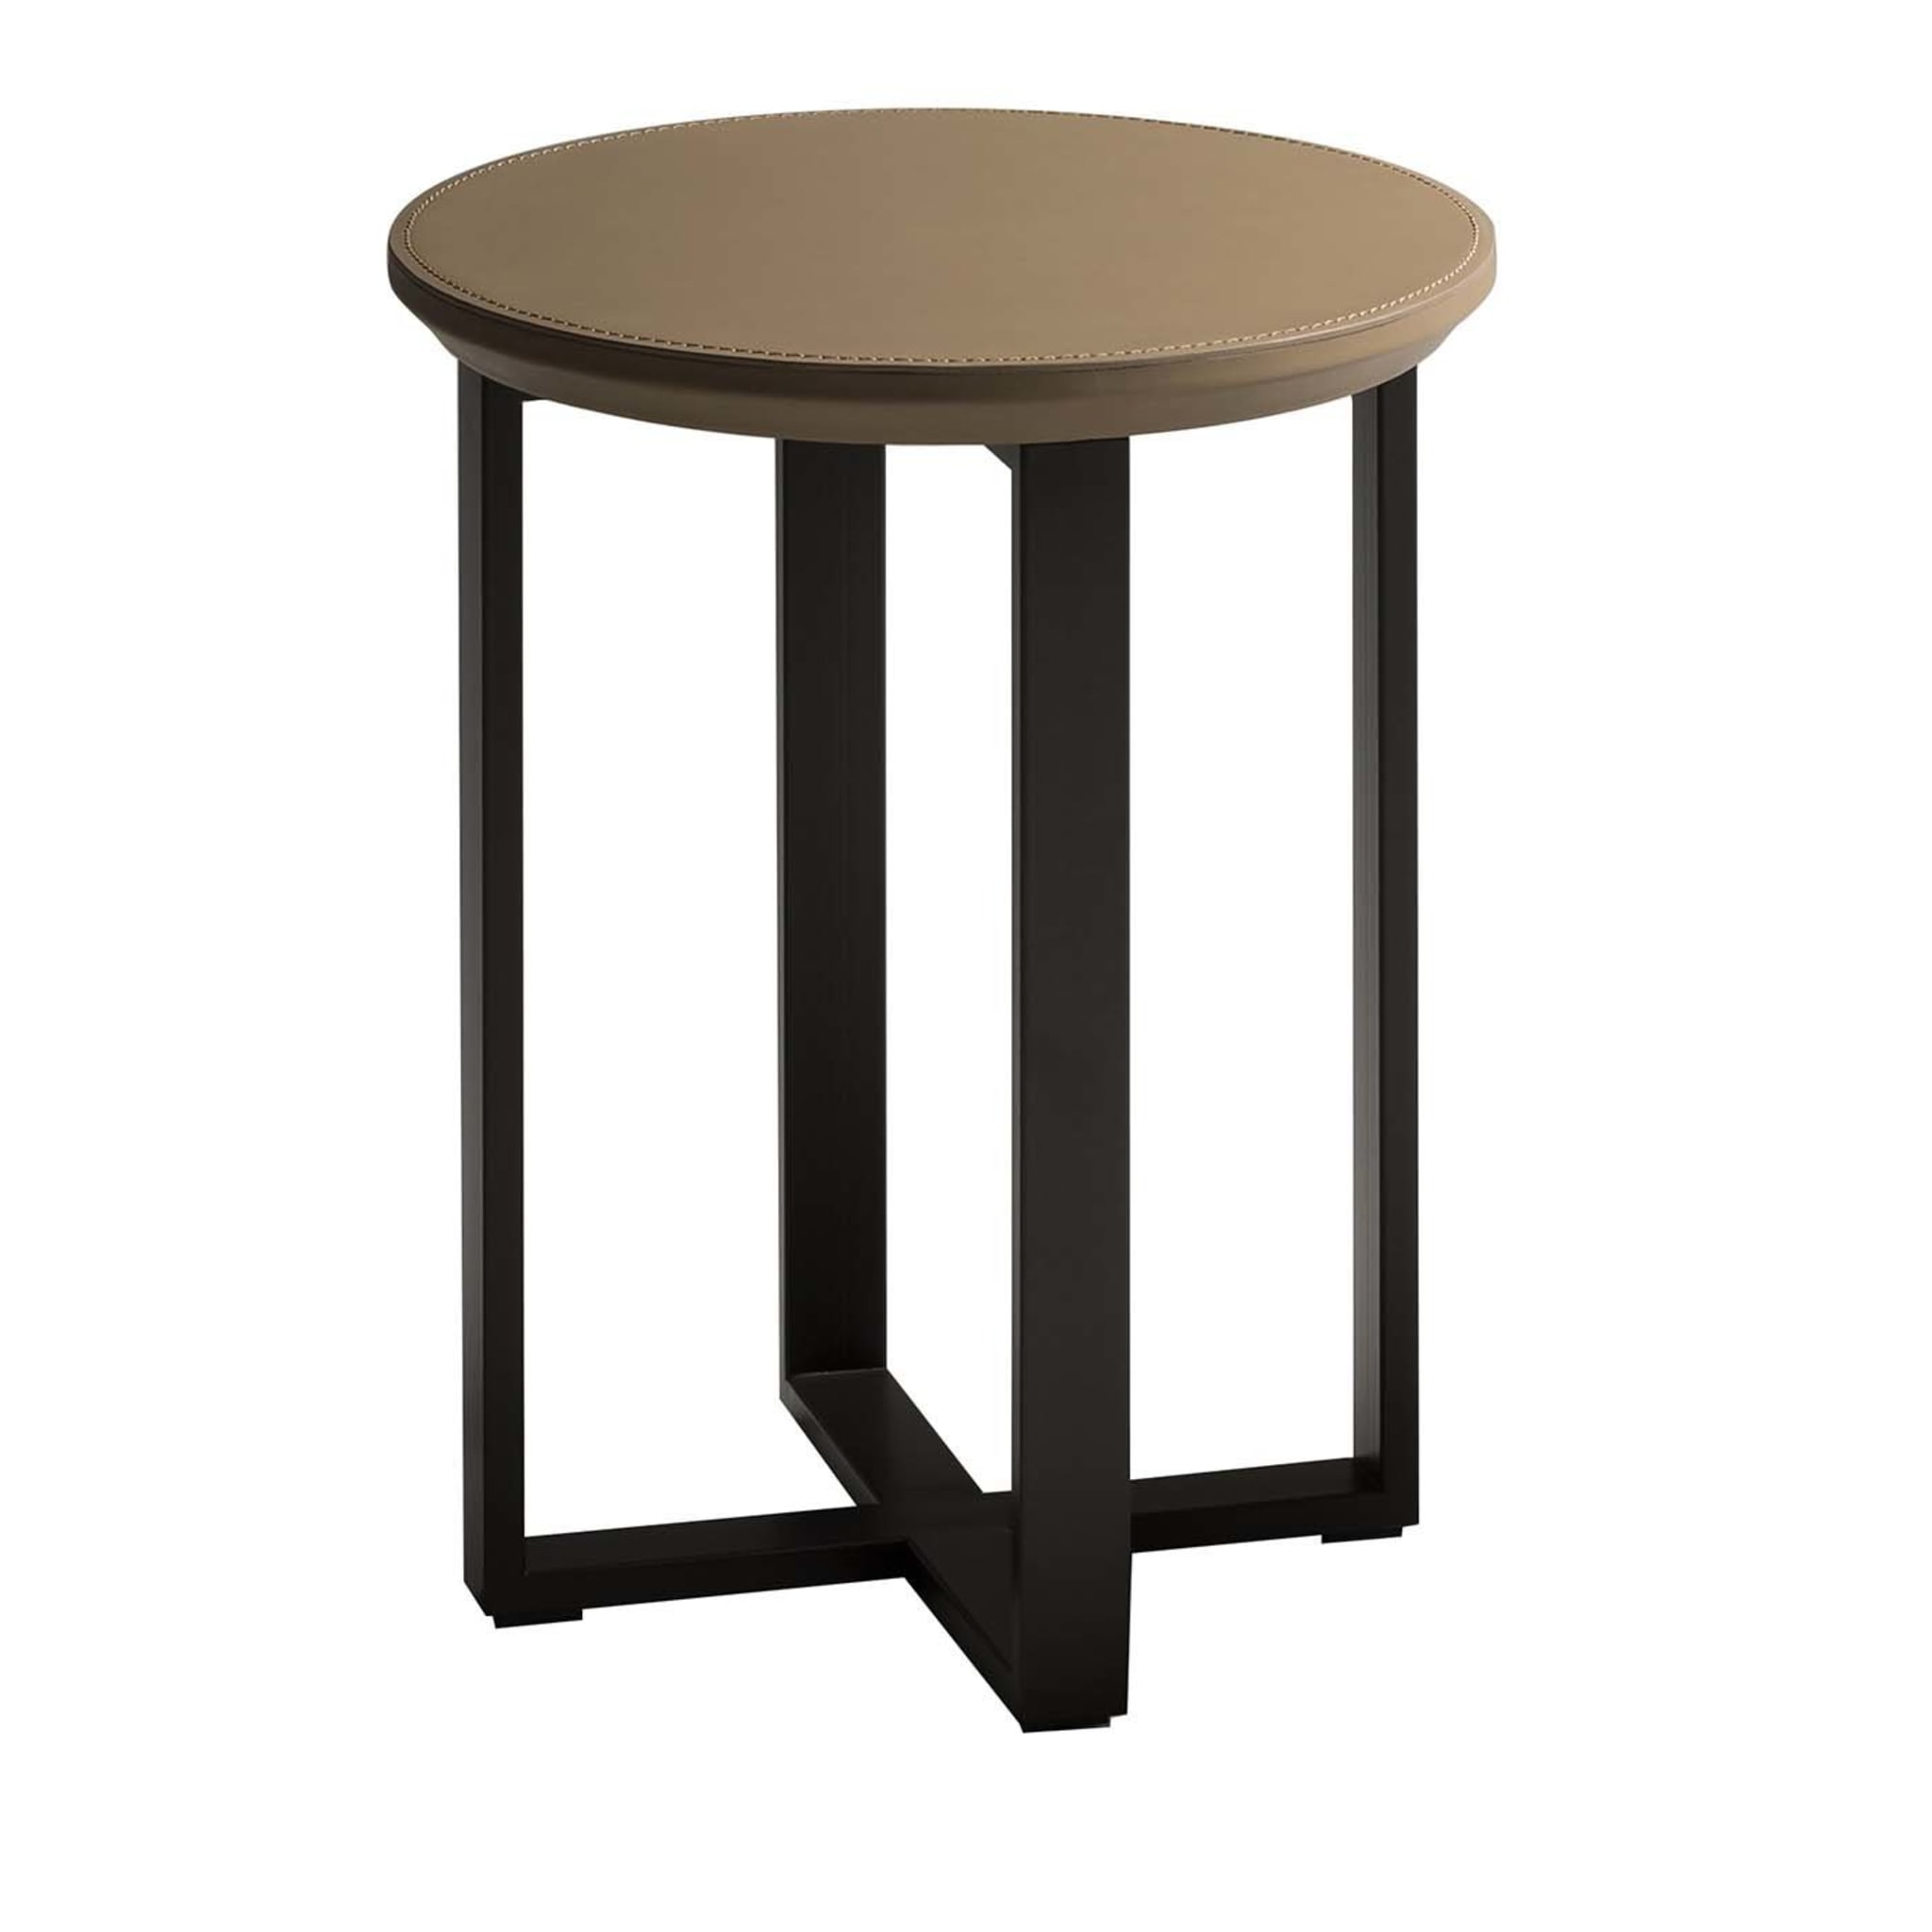 Scricciolo Side Table Tribeca Collection by Marco and Giulio Mantellassi - Main view